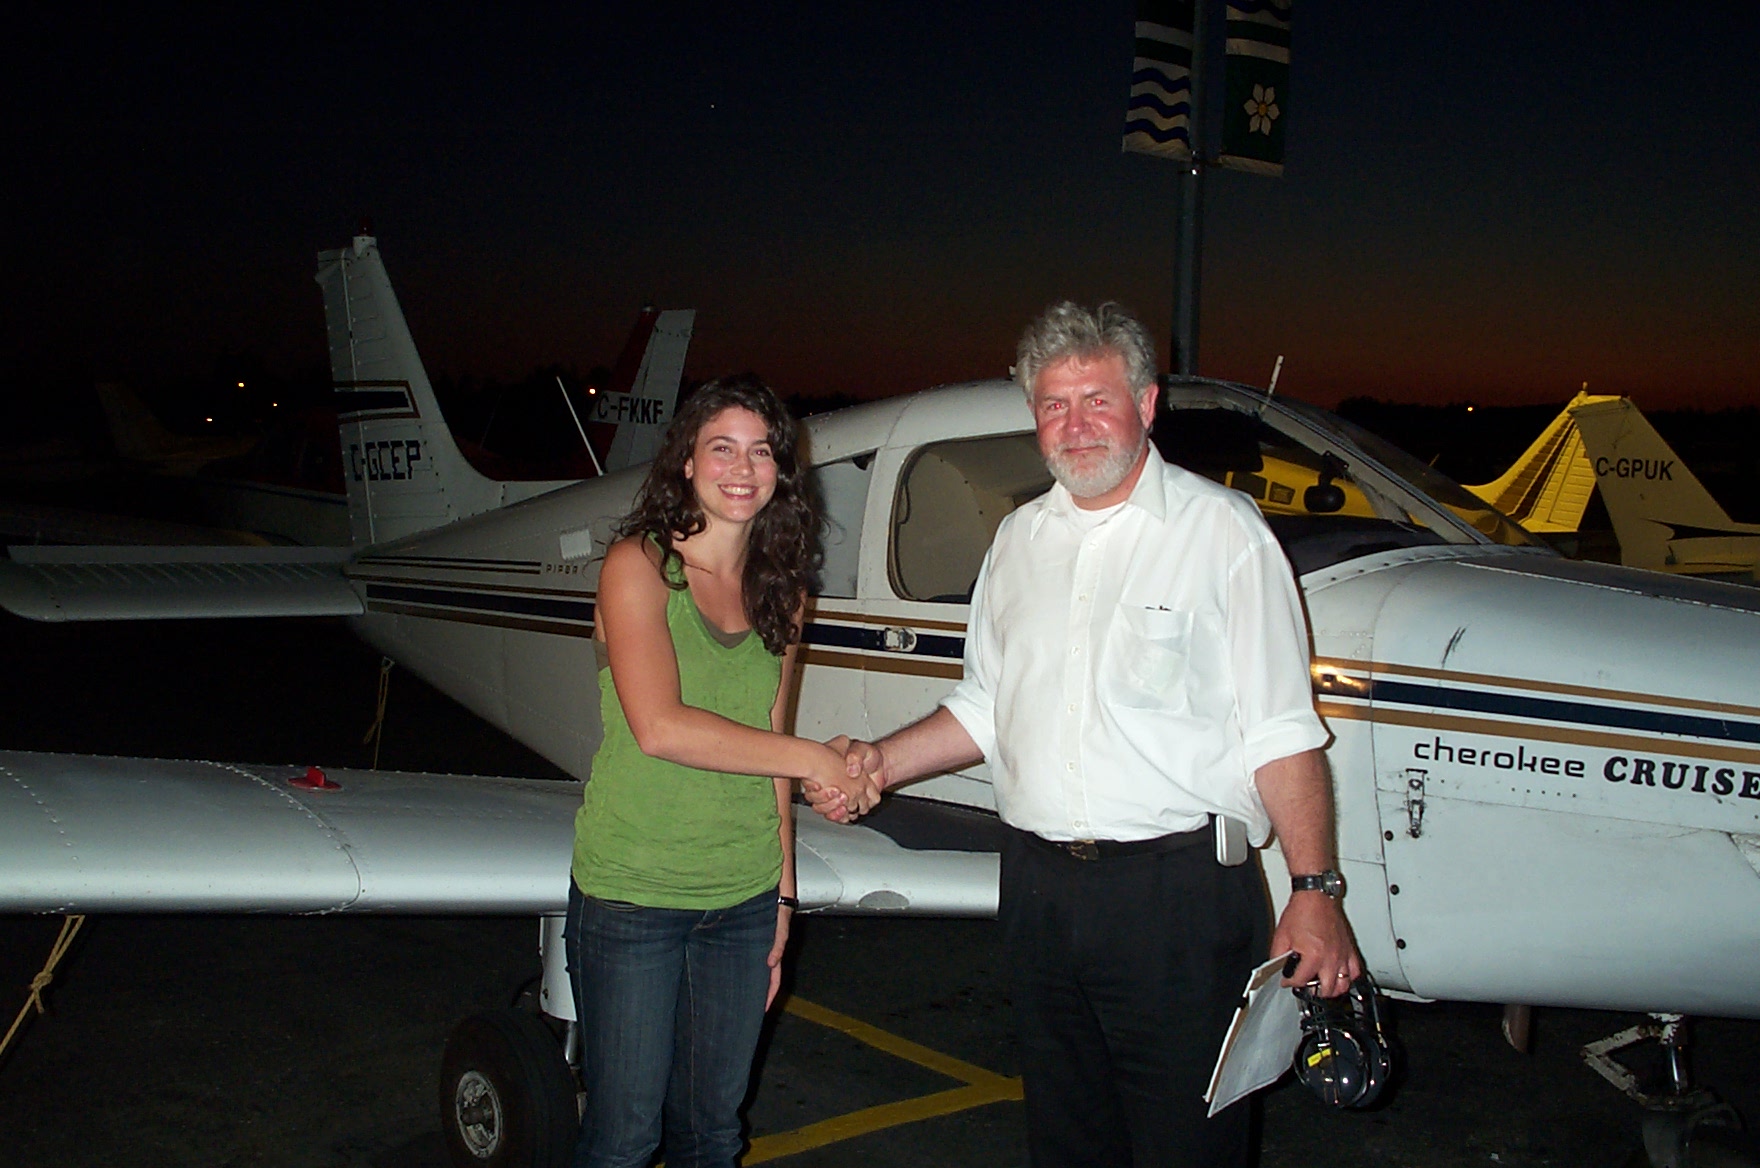 Karlee Janzen receives contratulations from Pilot Examiner Paul Harris after the successful completion of Karlee's Private Pilot Flight Test on July 16, 2010. Congrats also to Karlee's Flight Instructor, Mayank Mittal. Langley Flying School.